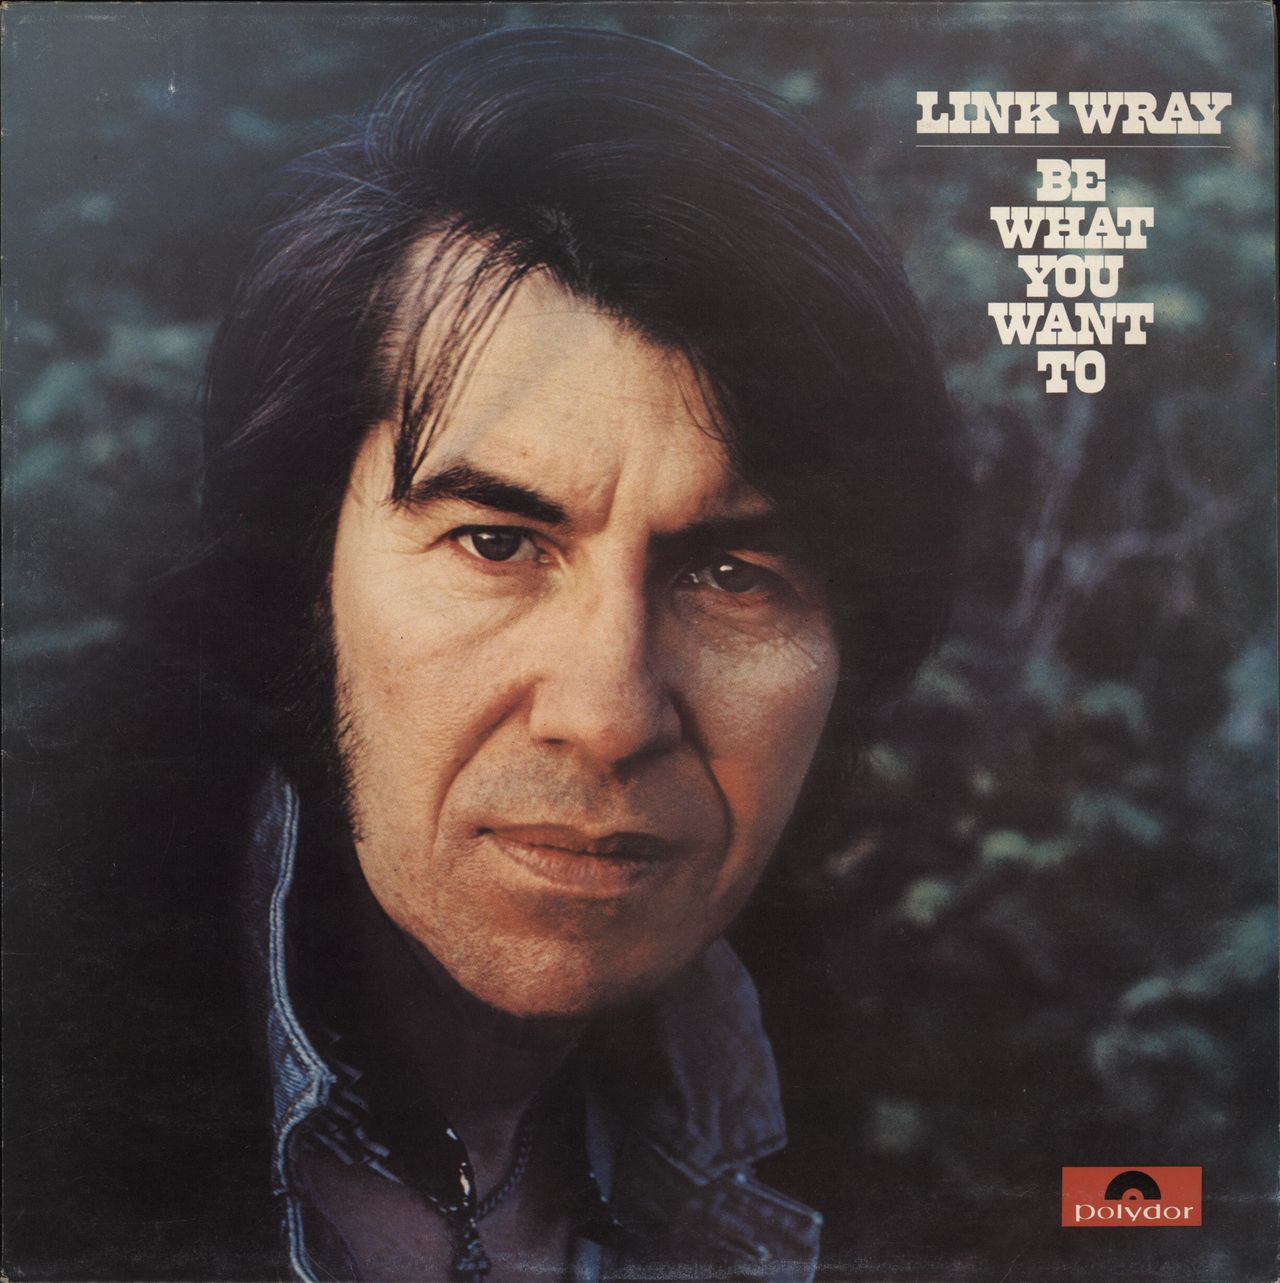 Wray Be What You Want To LP RareVinyl.com